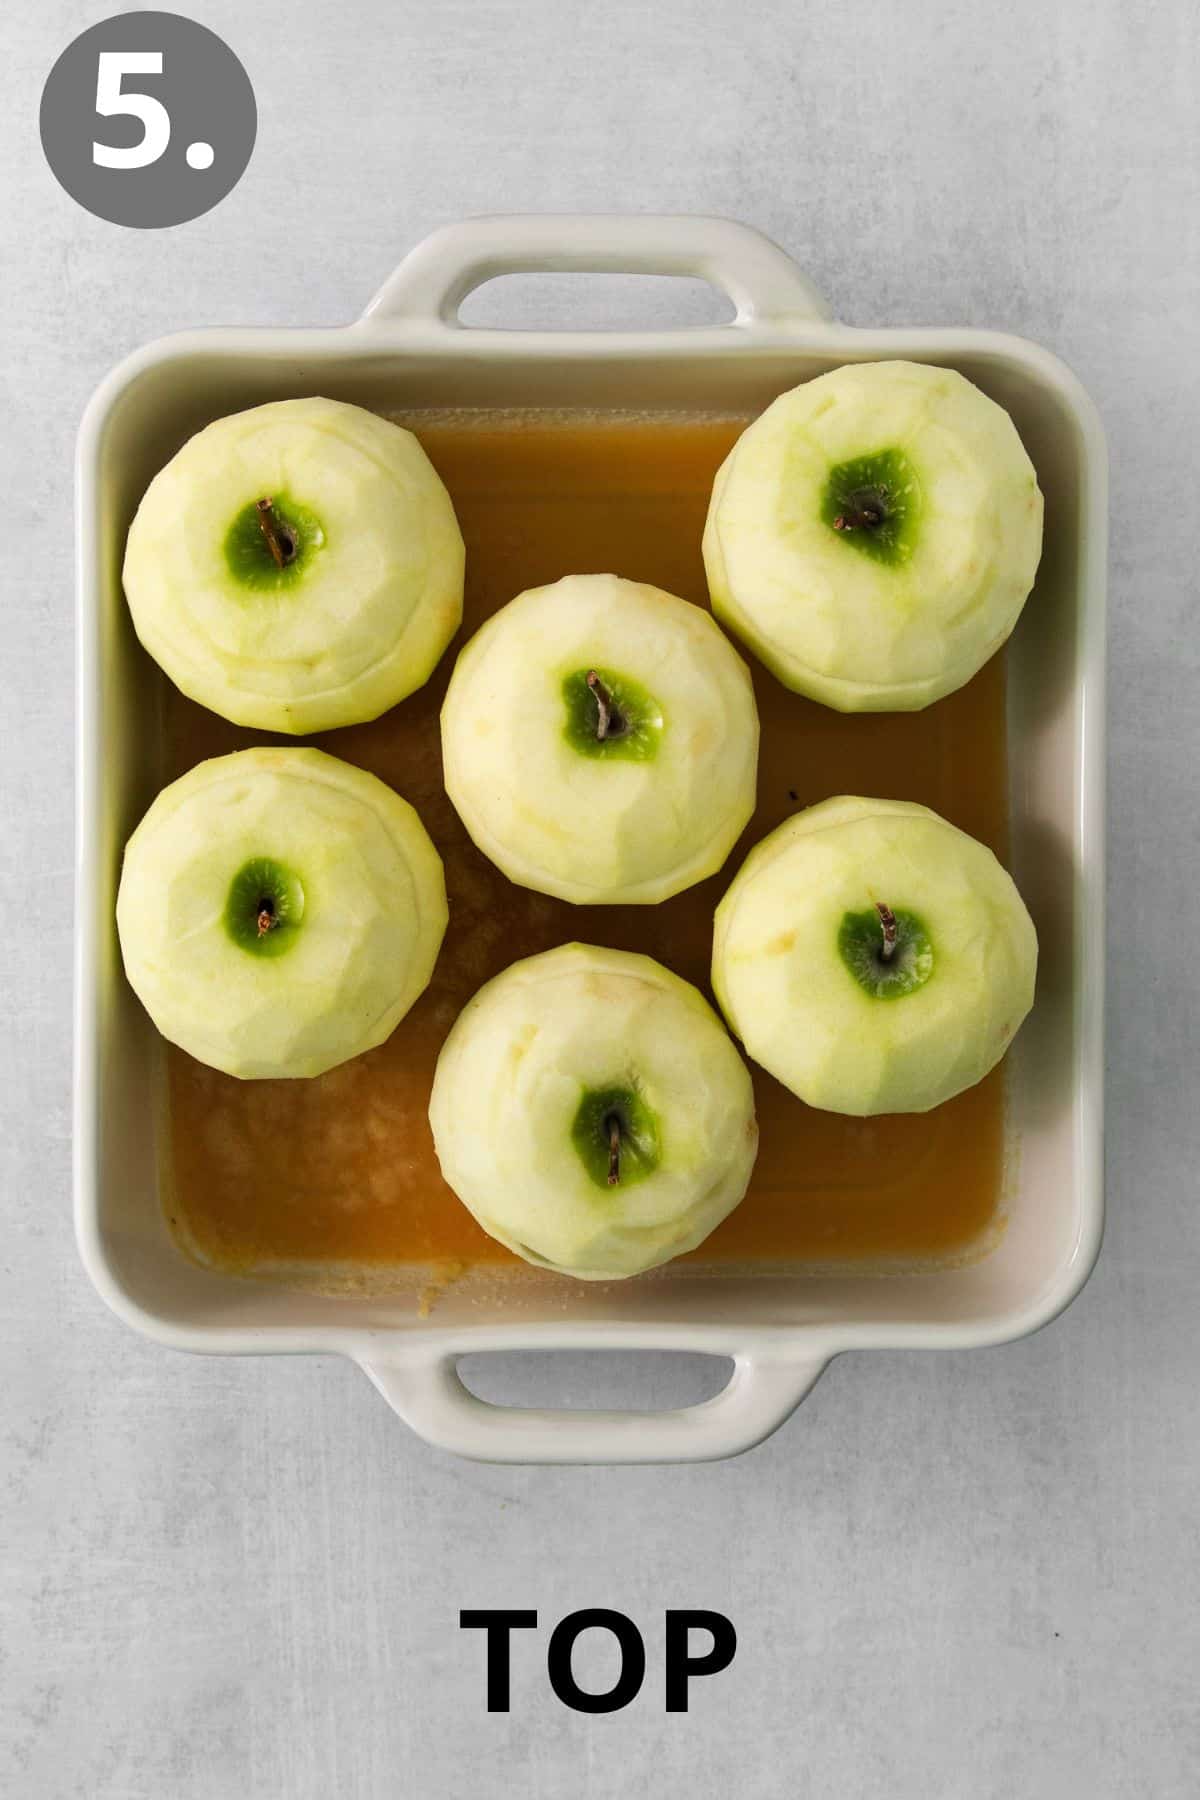 Baked apples with tops on them in a baking dish